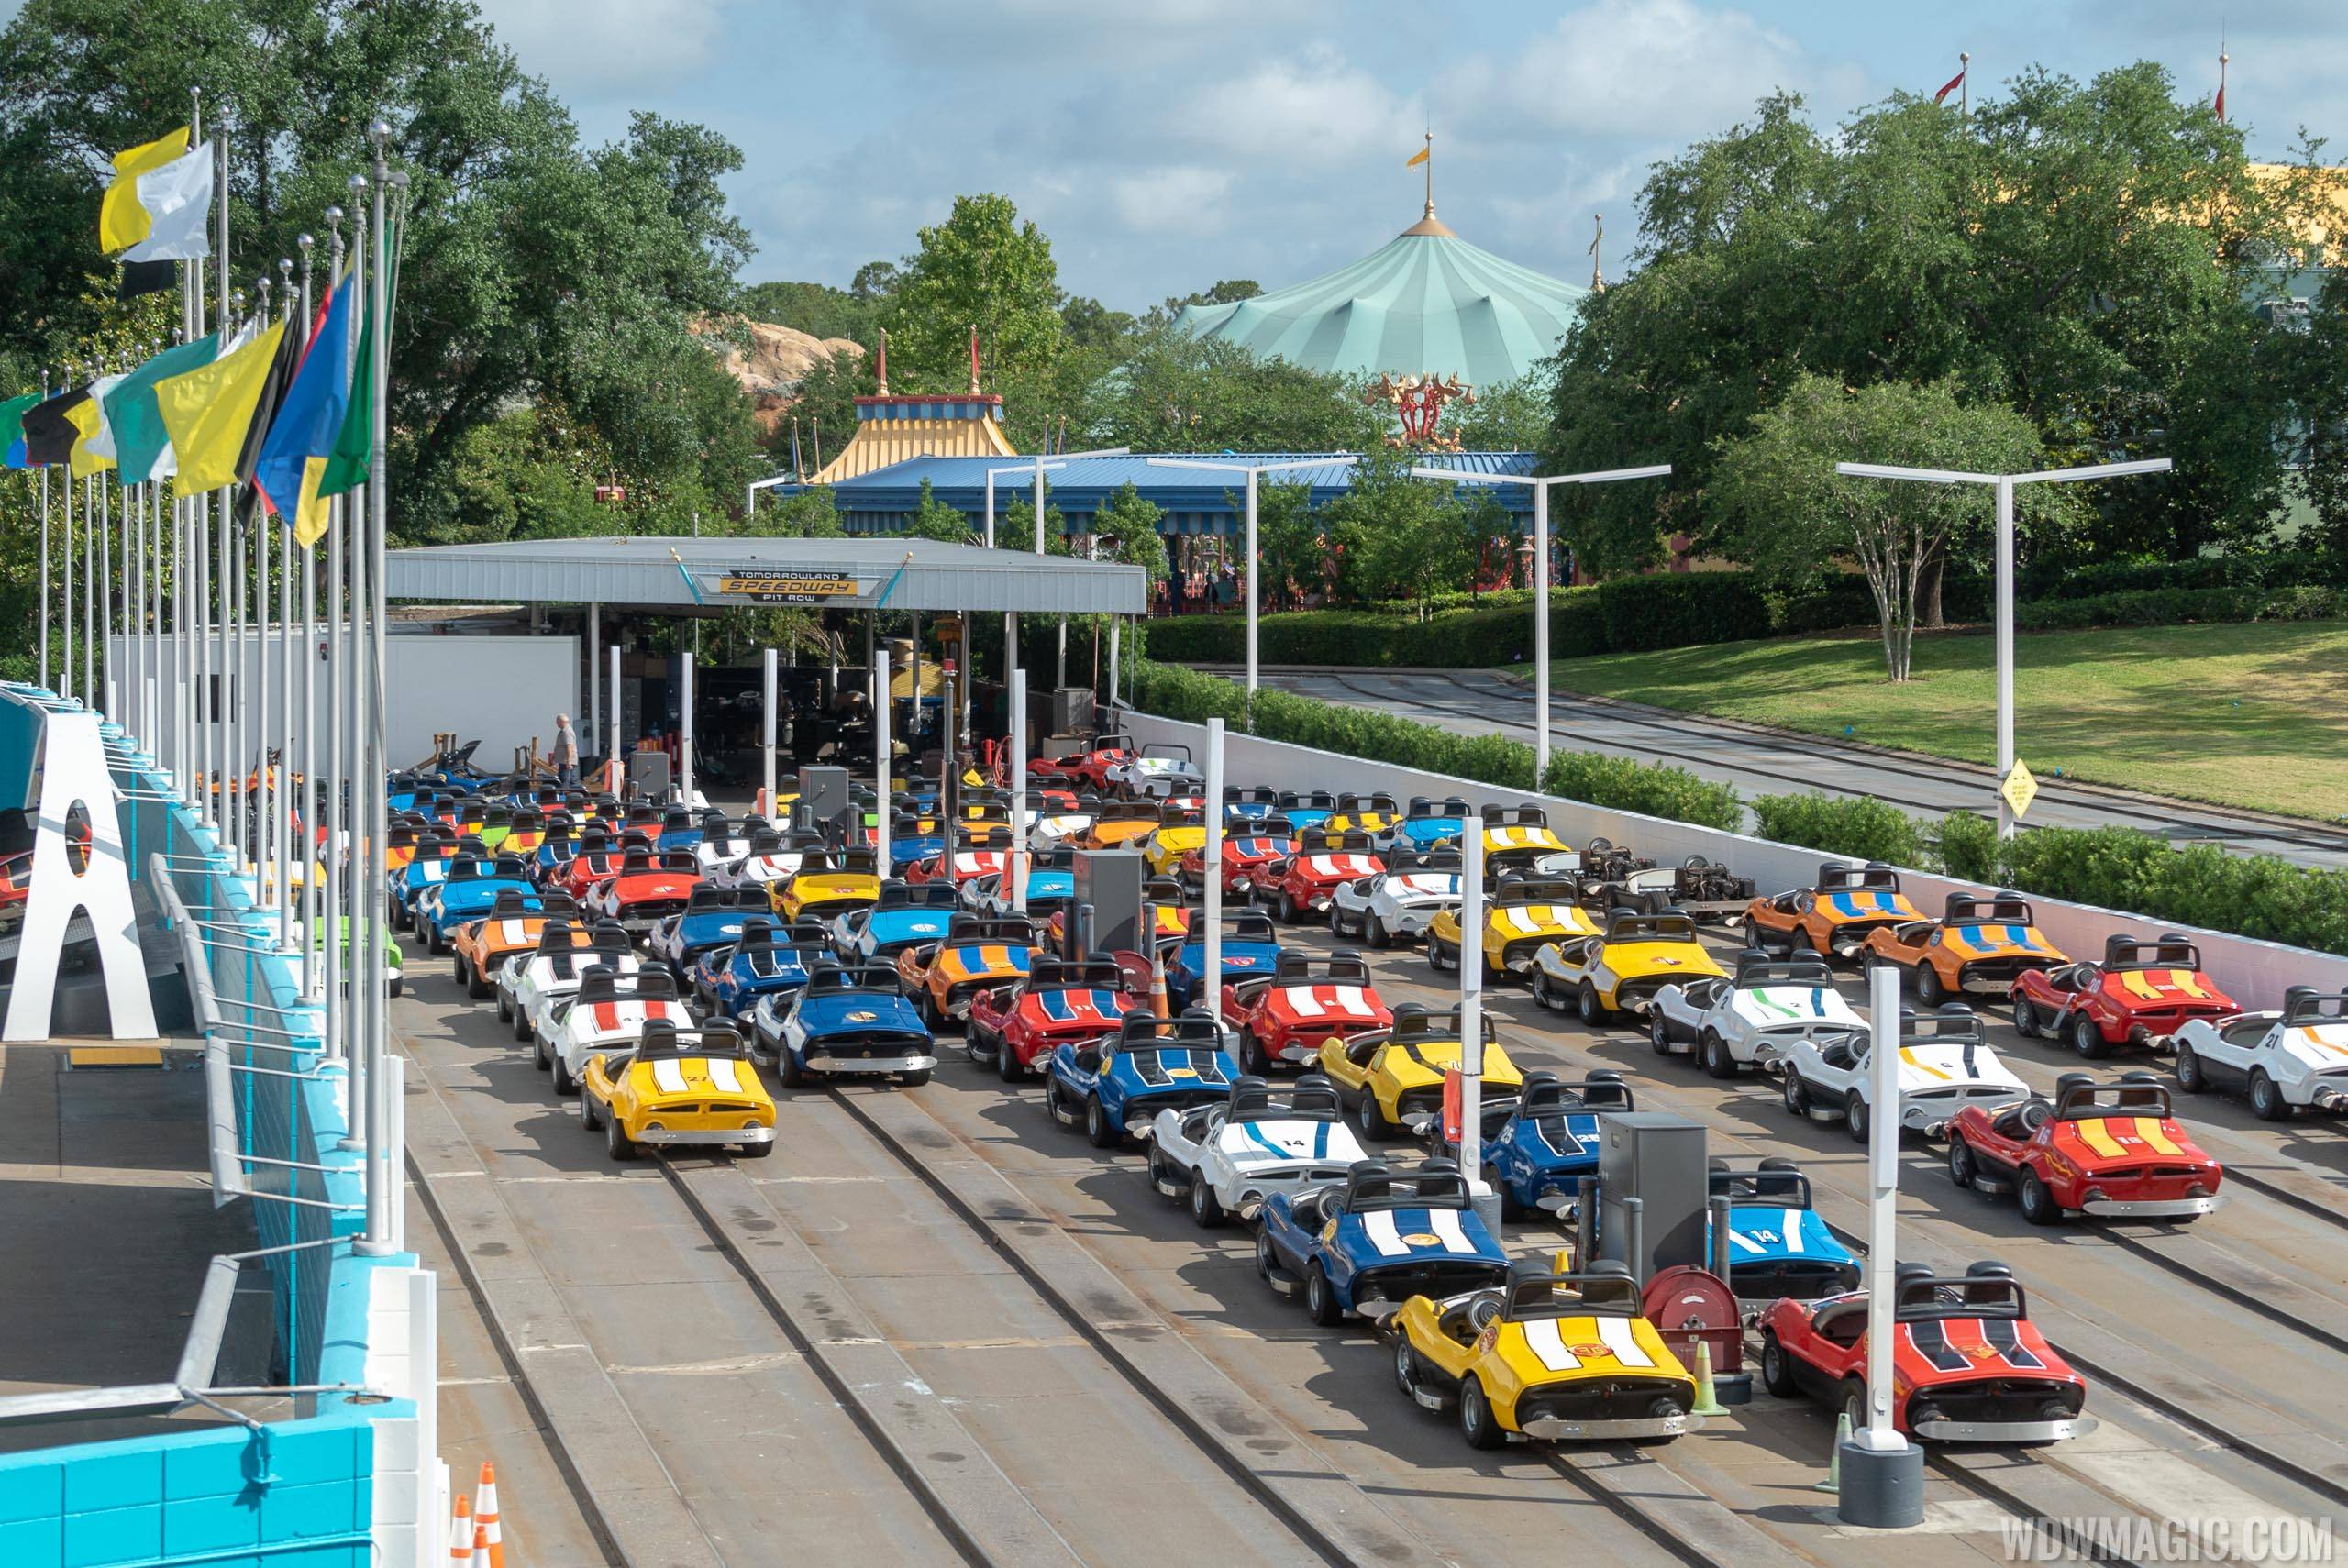 Tomorrowland Speedway reopens after 5 month closure